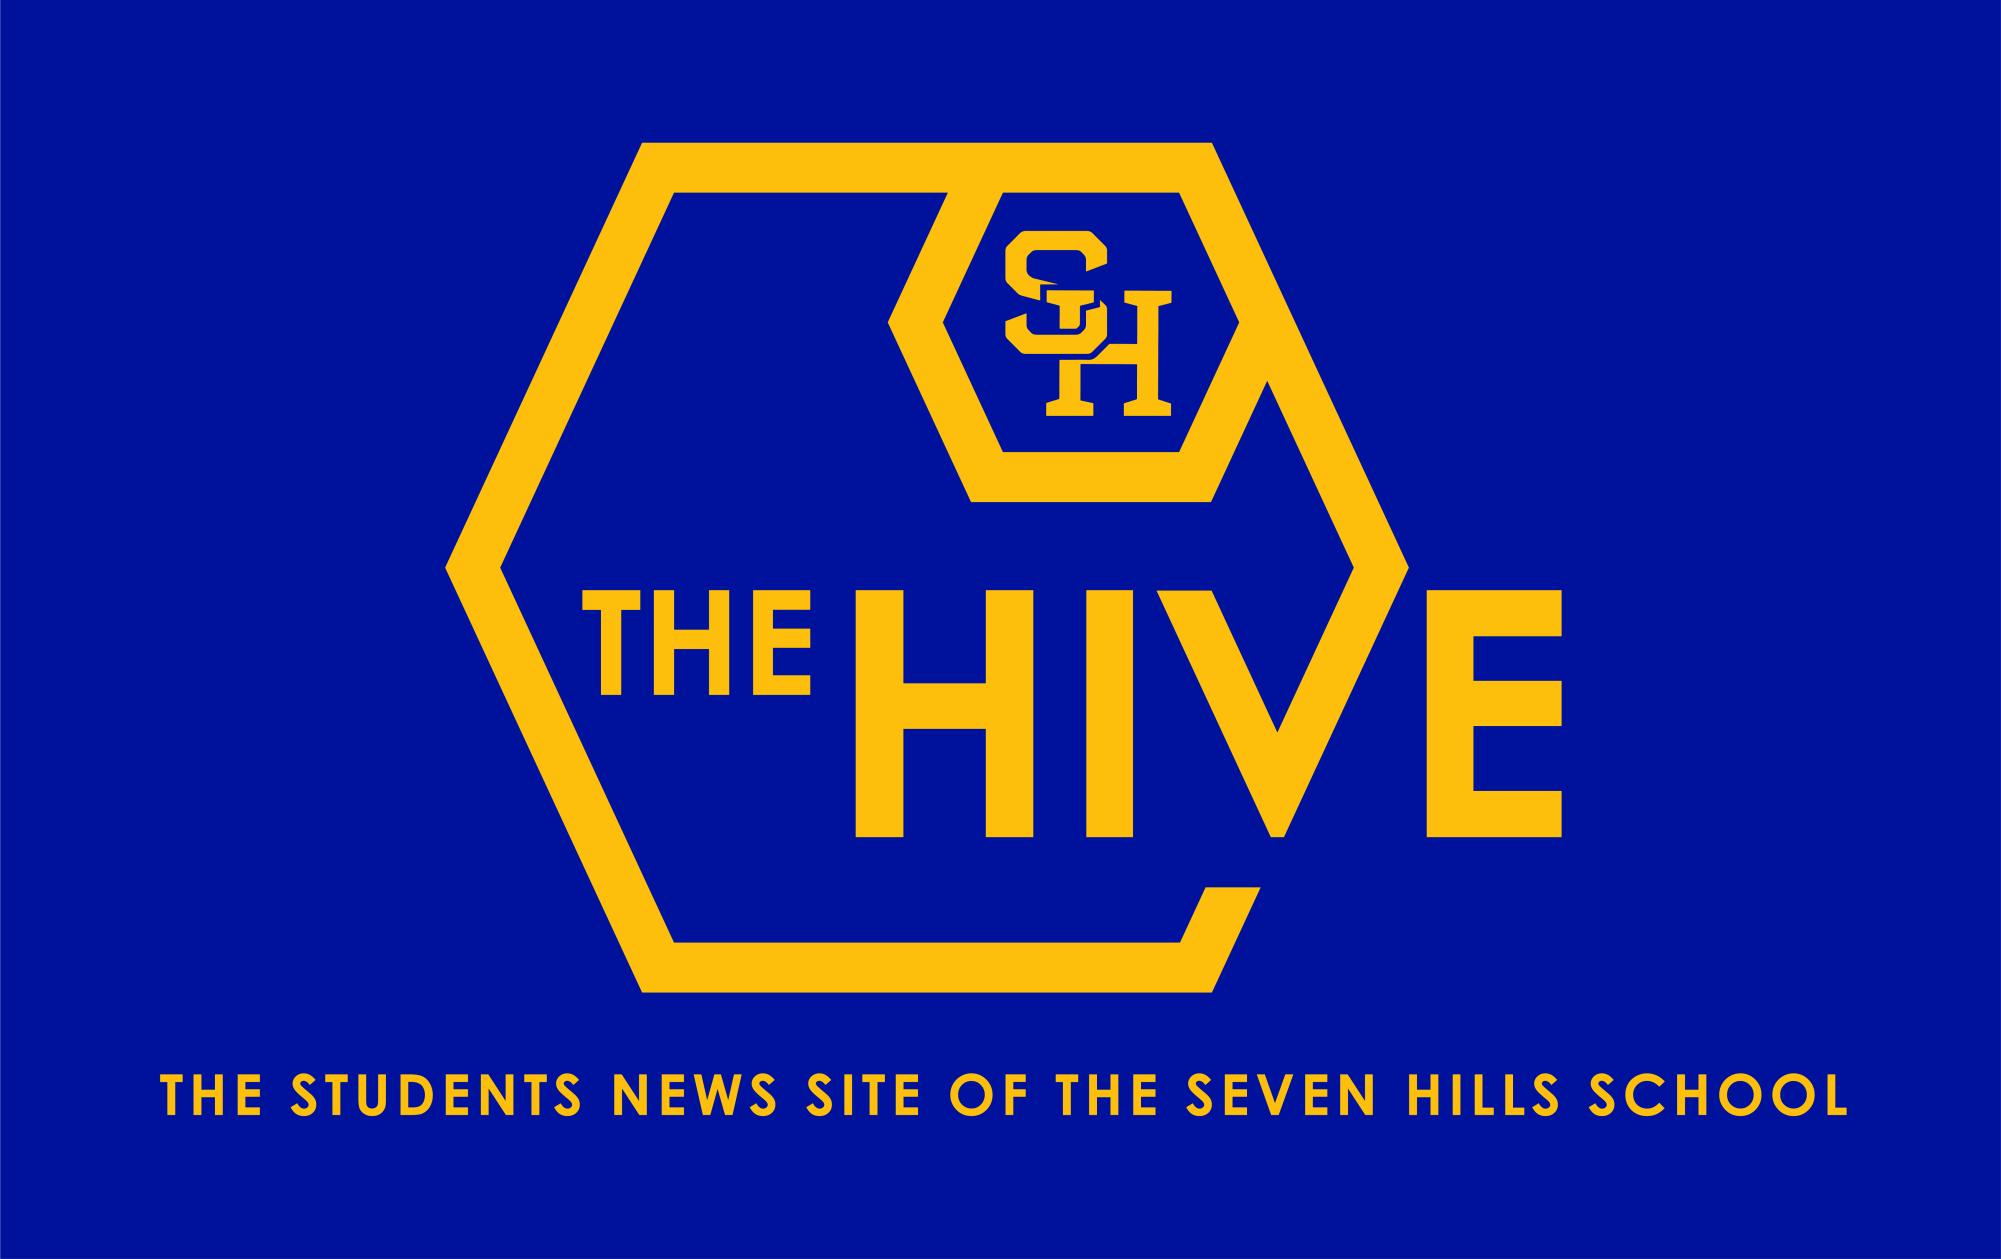 The Student News Site of The Seven Hills School